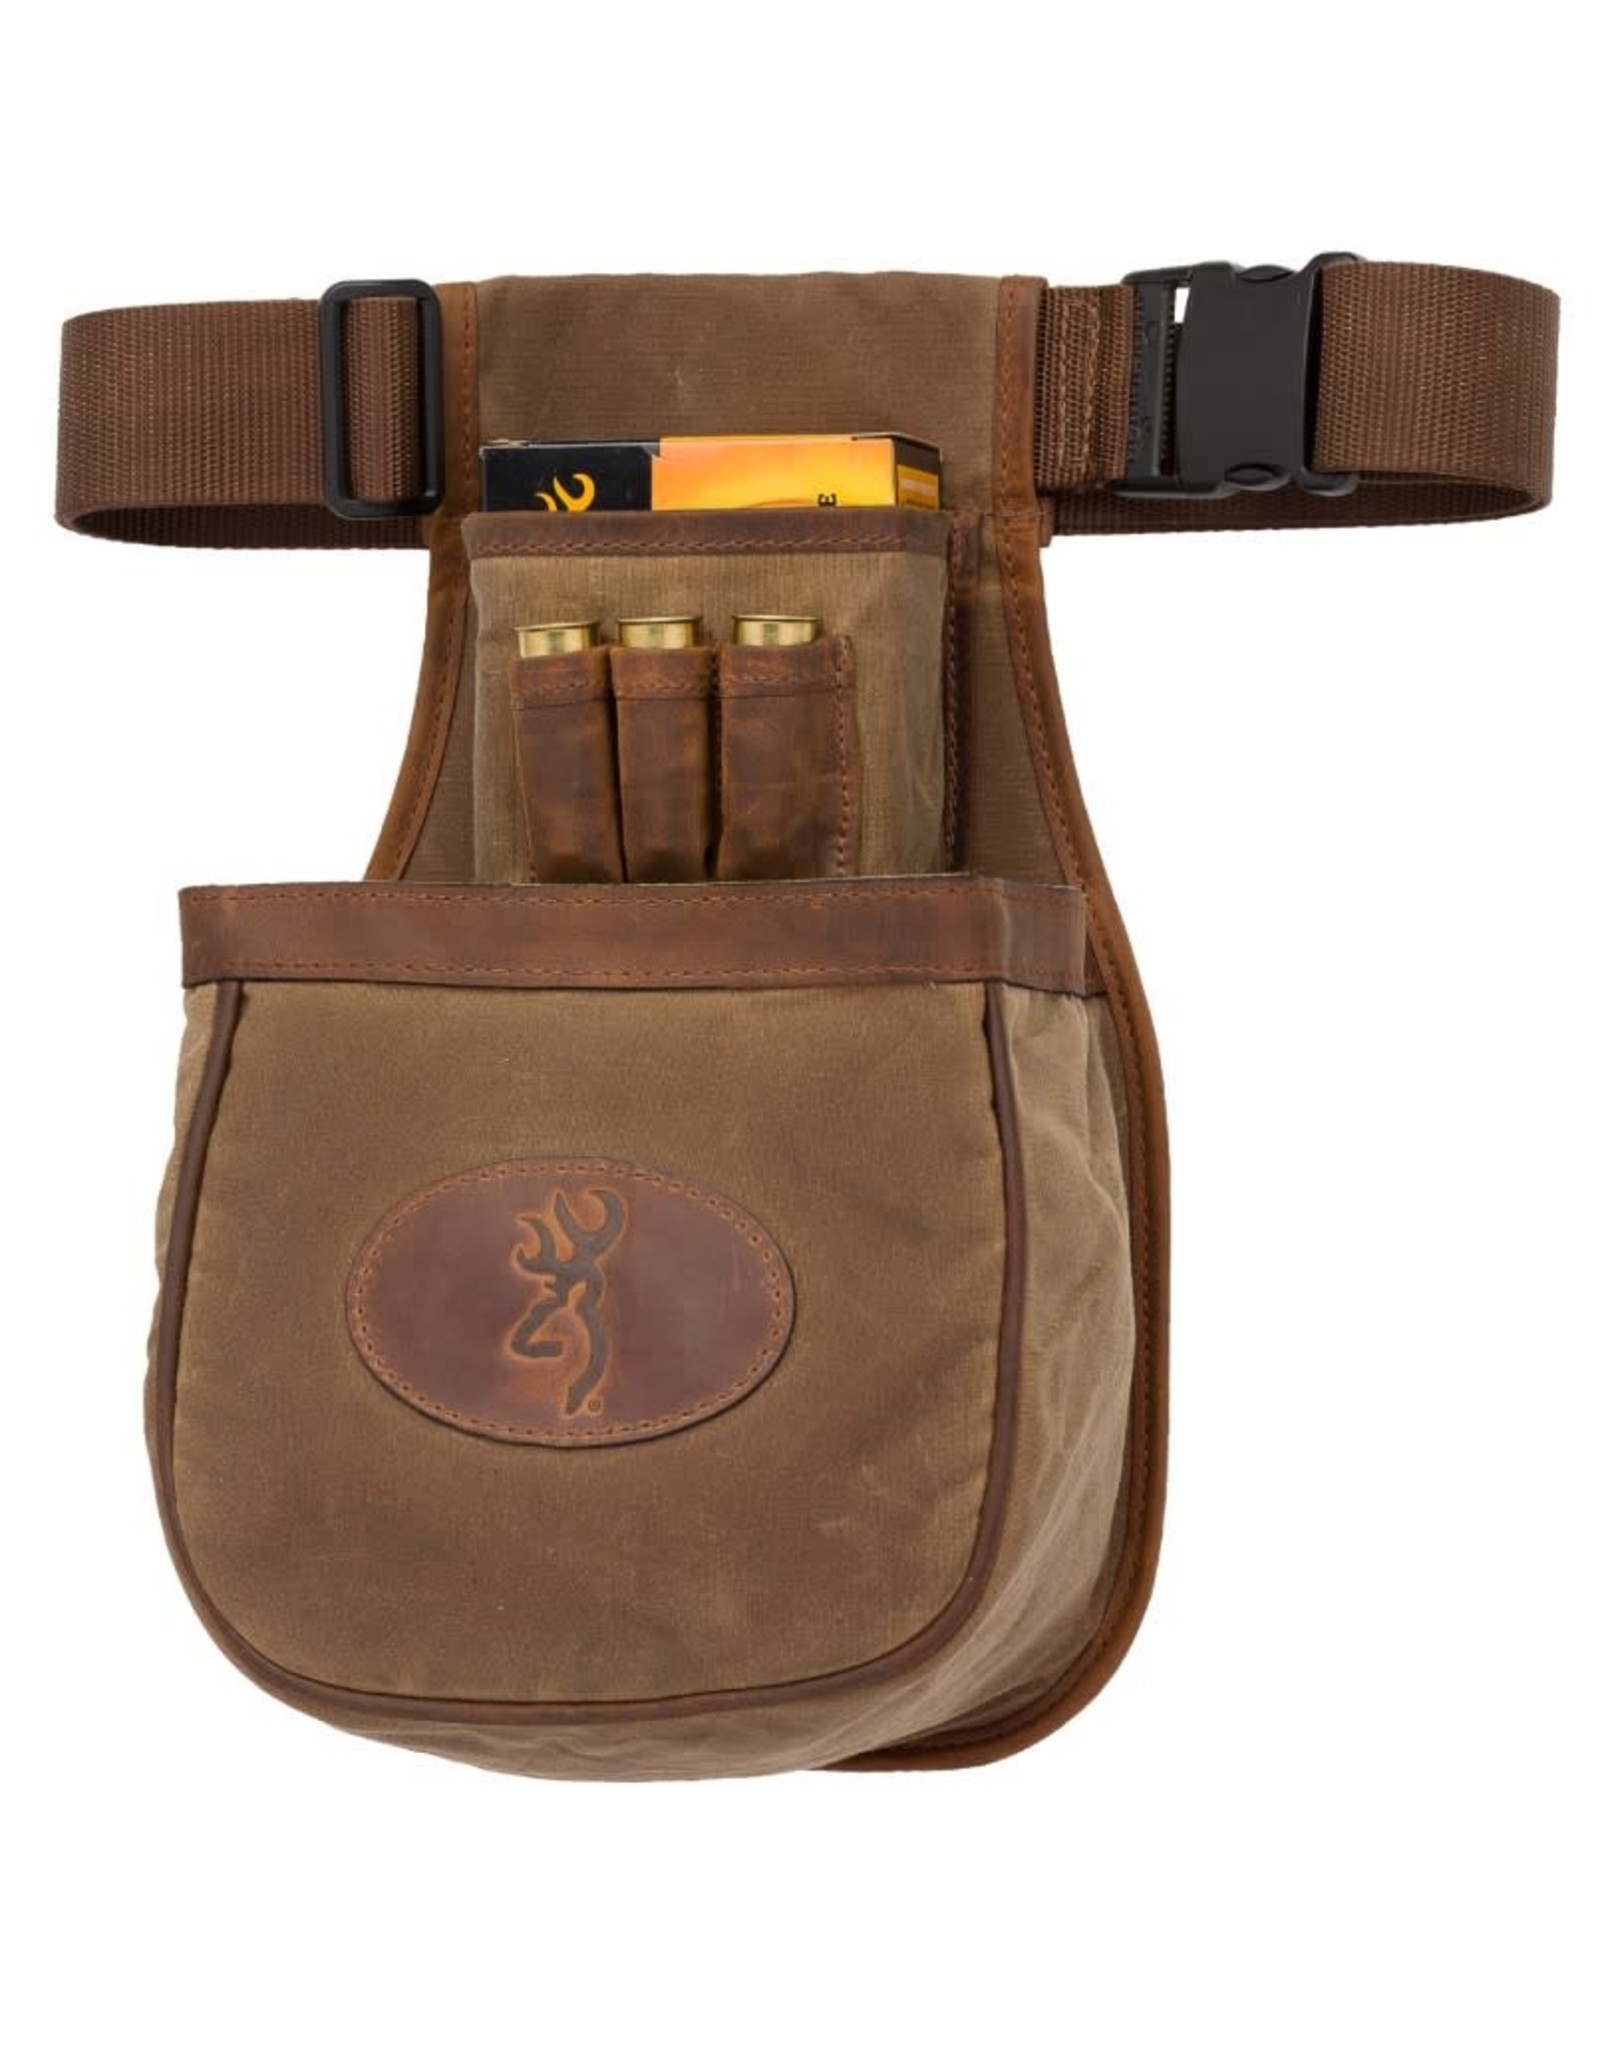 Browning Browning Santa Fe Deluxe Trap Shell Pouch